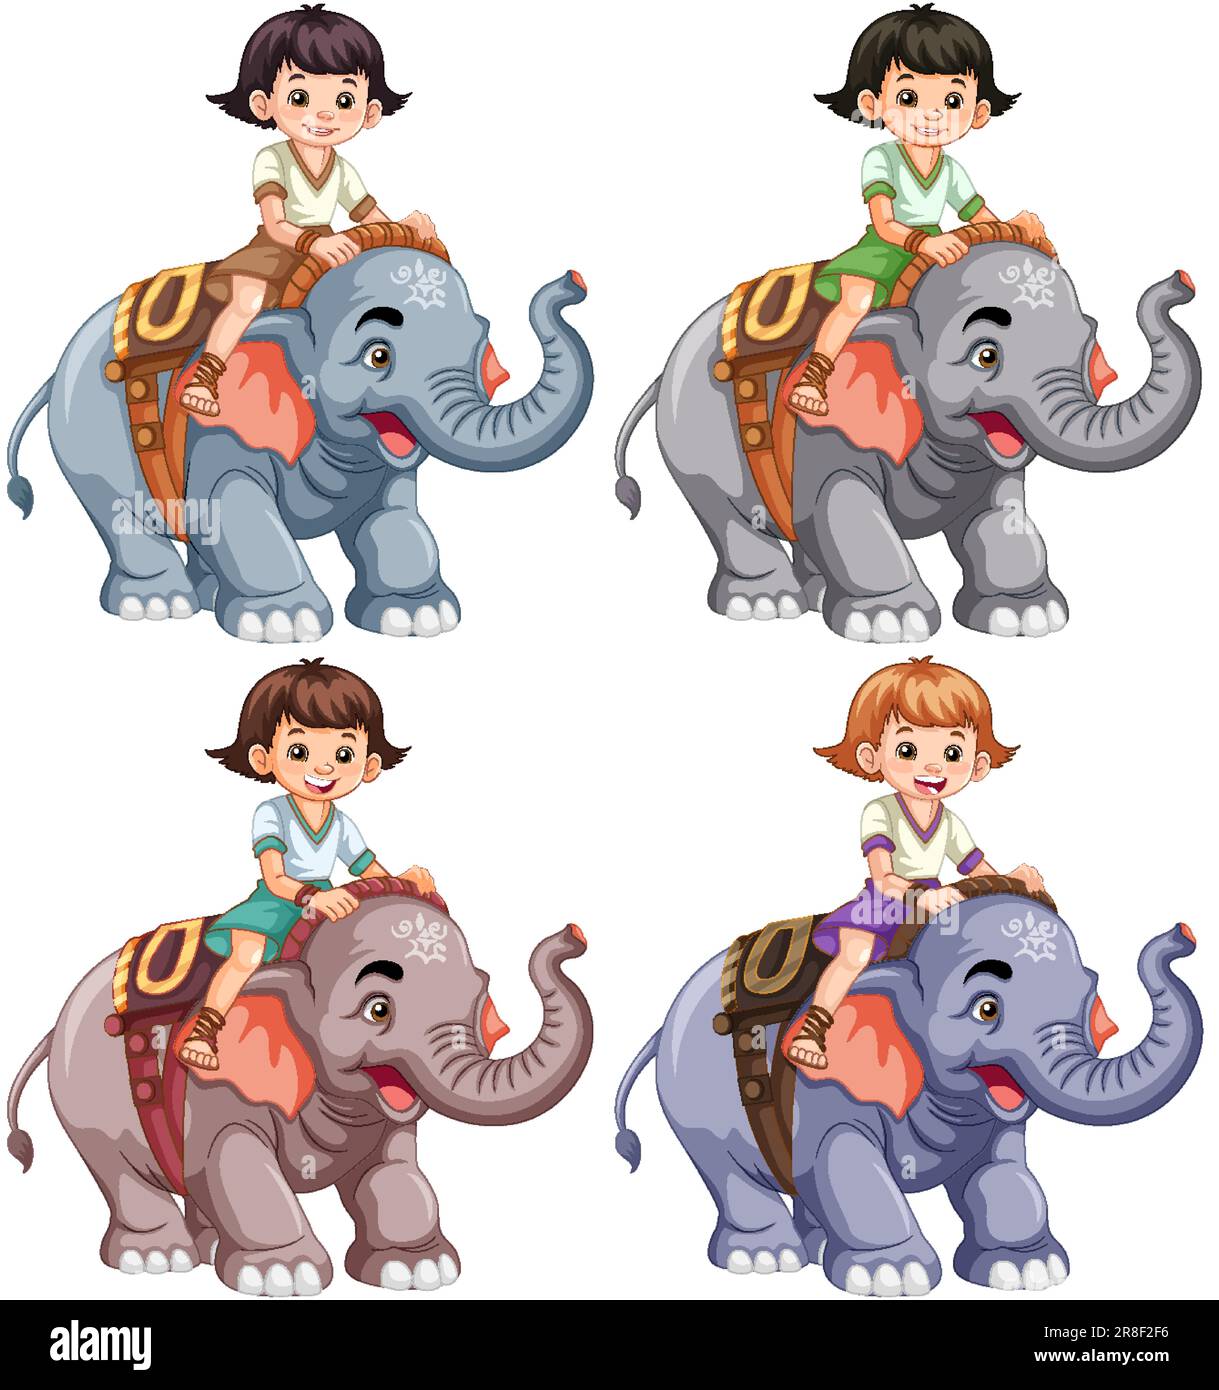 Collection of different kids riding elephants illustration Stock Vector ...